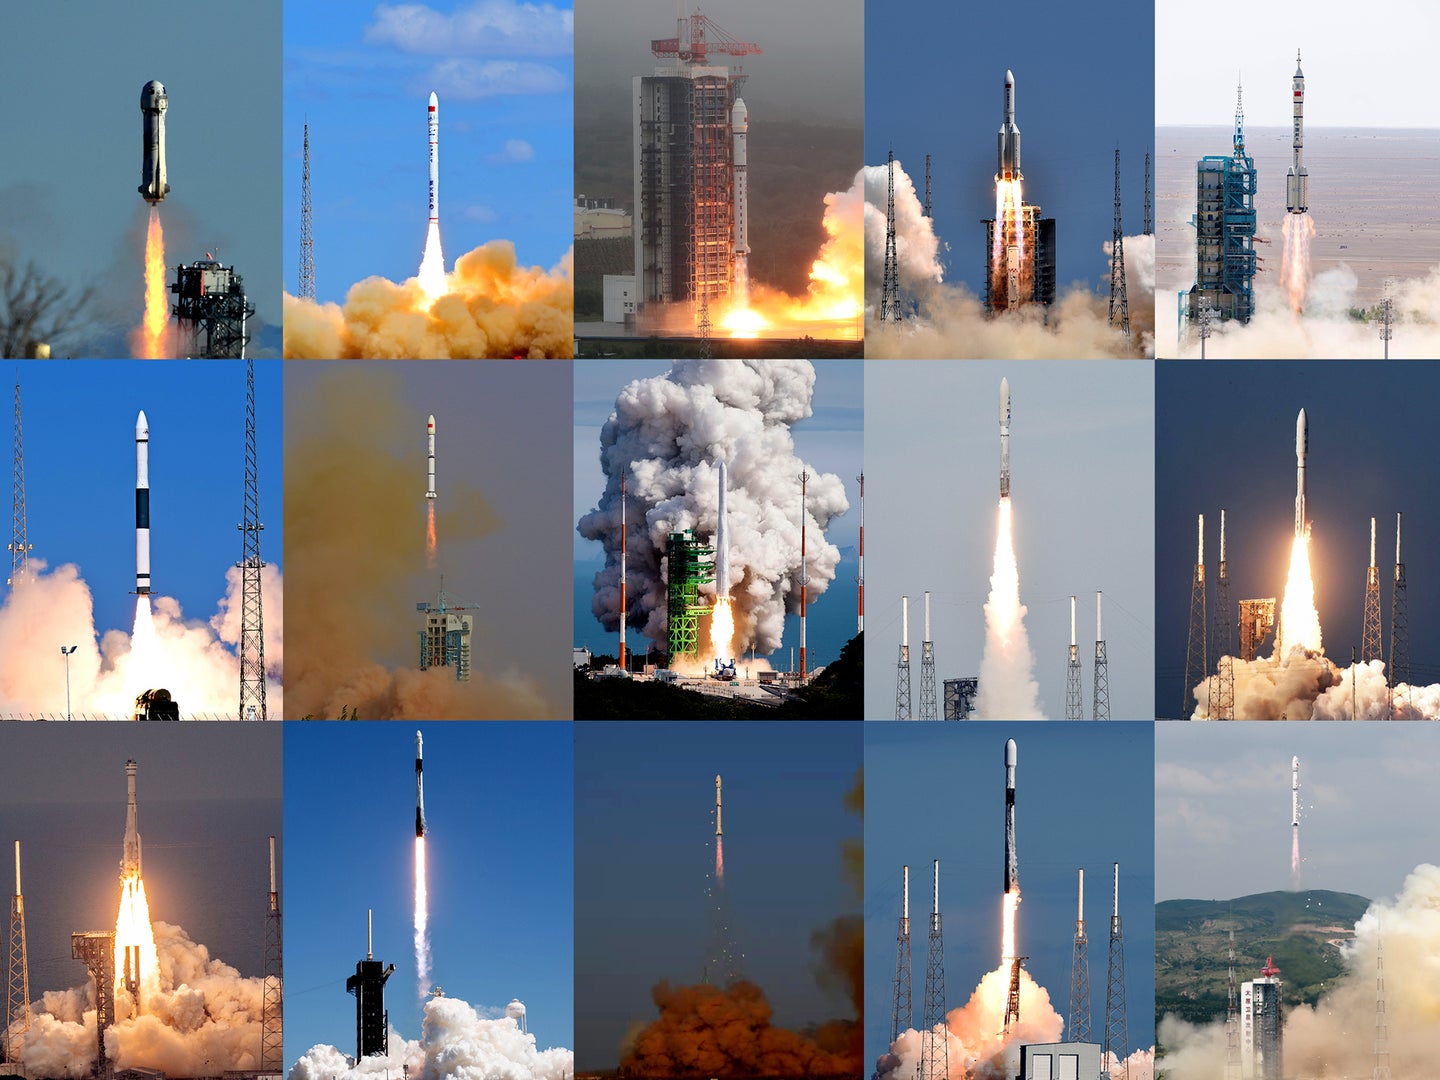 15 rocket launches from SpaceX, NASA, Blue Origin, and more in a collage